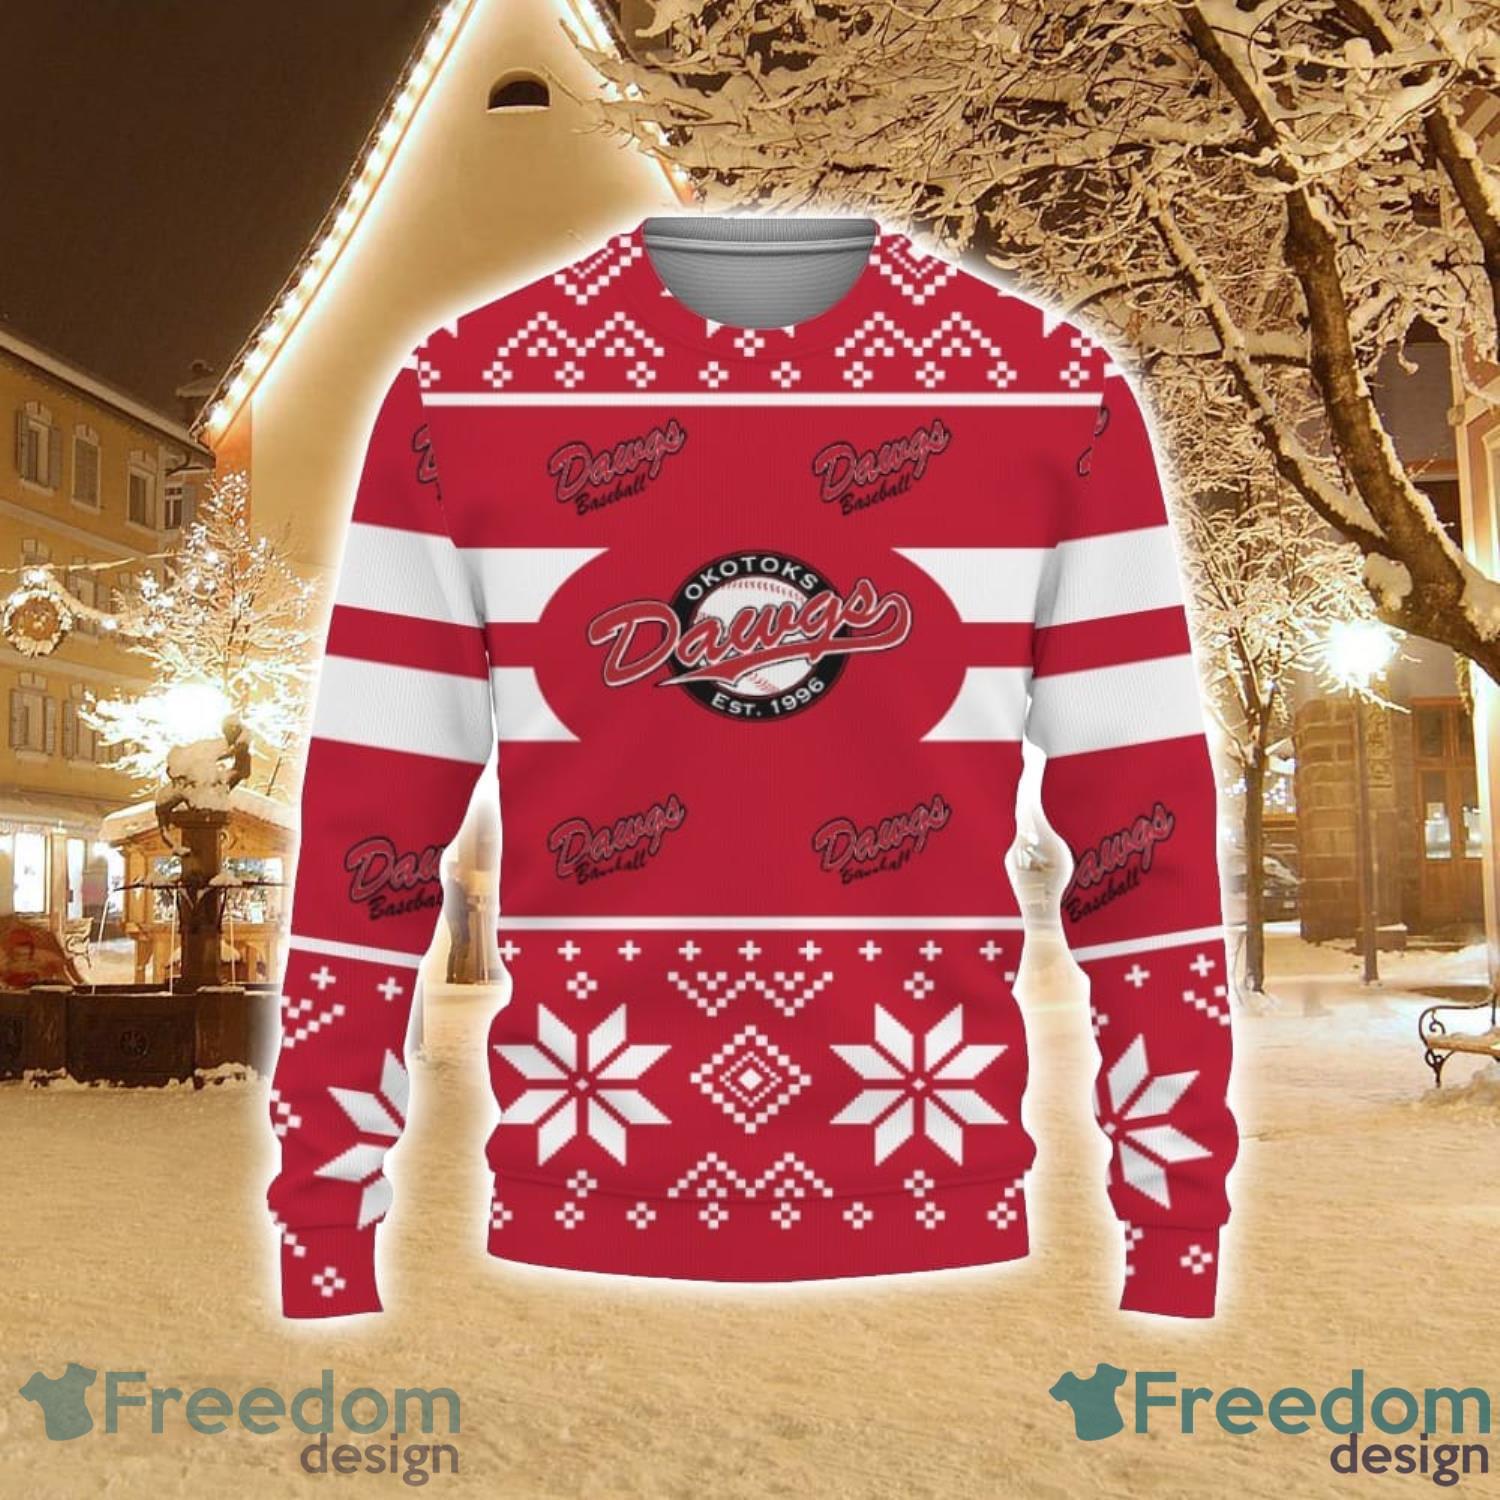 Colorado Buffaloes Custom New Uniforms For Fan Gear Knitted Christmas  Sweater All Over Print - Limotees